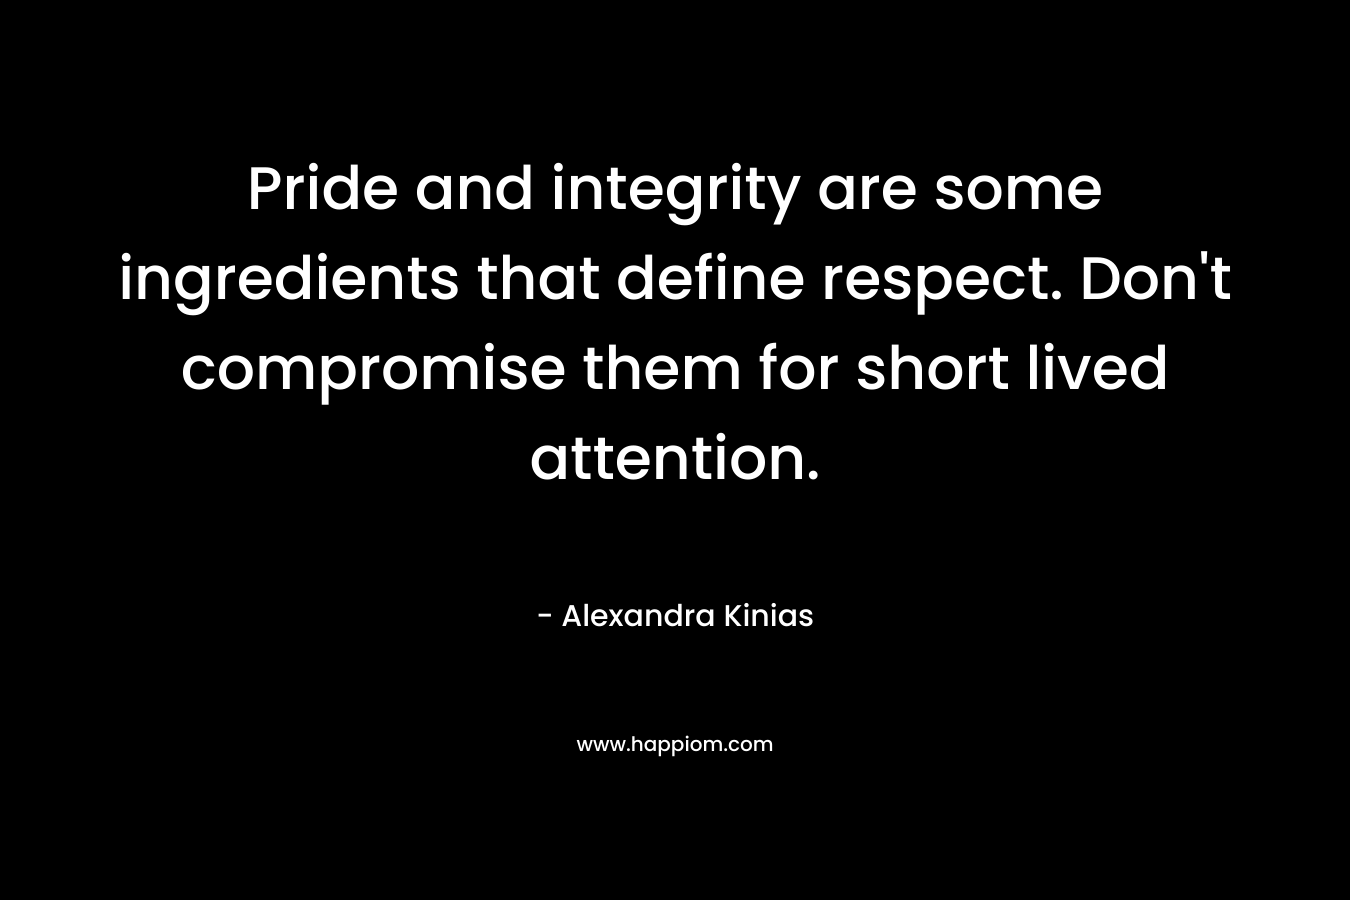 Pride and integrity are some ingredients that define respect. Don’t compromise them for short lived attention. – Alexandra Kinias